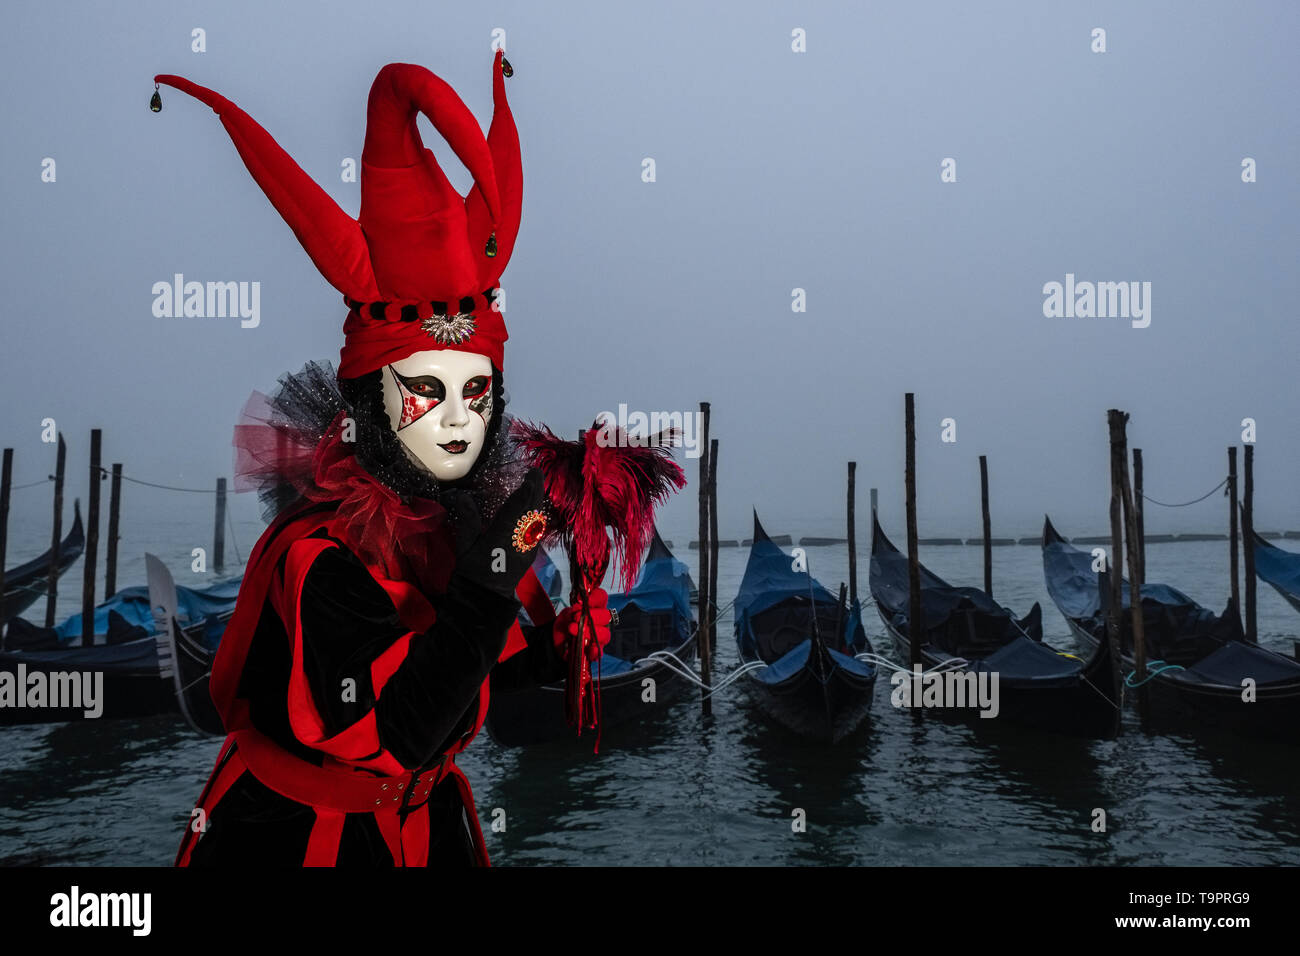 Portrait of a feminin masked person in a beautiful creative costume, posing at Grand Canal, Canal Grande, celebrating the Venetian Carnival, the islan Stock Photo